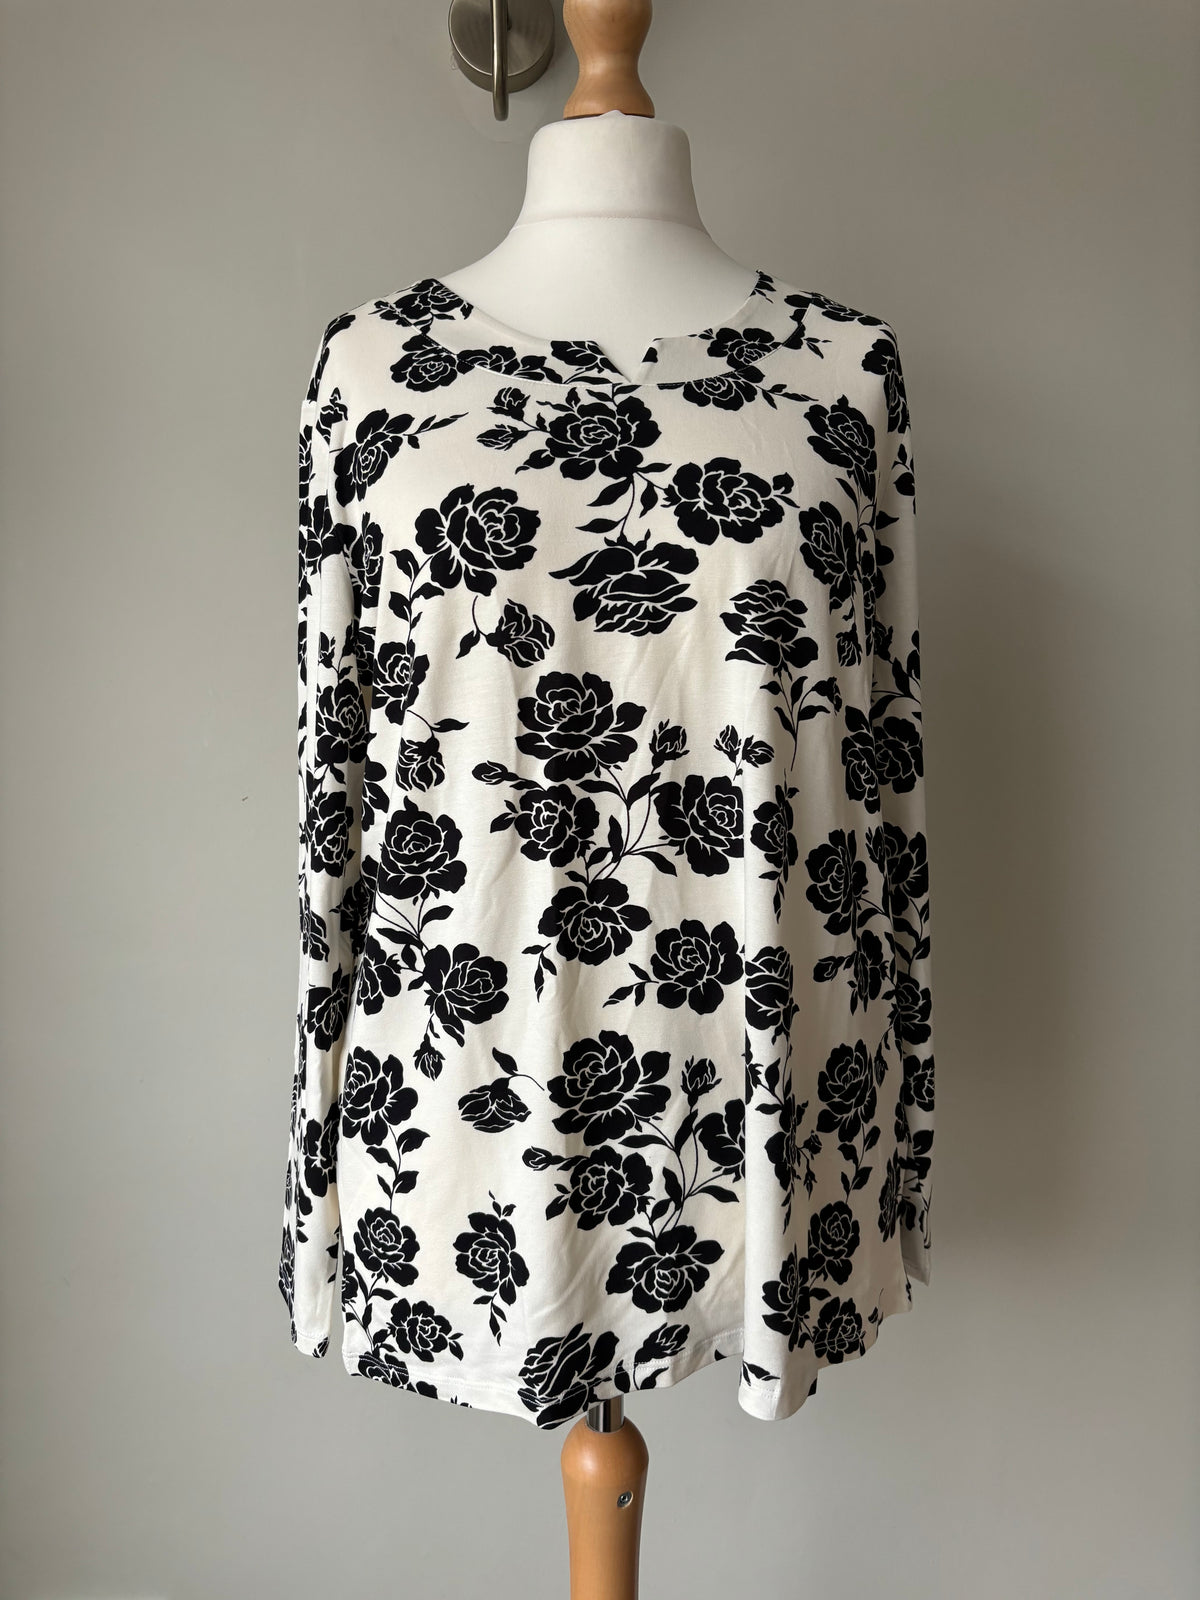 Floral Print Long Sleeve Top by Creation L Size 20